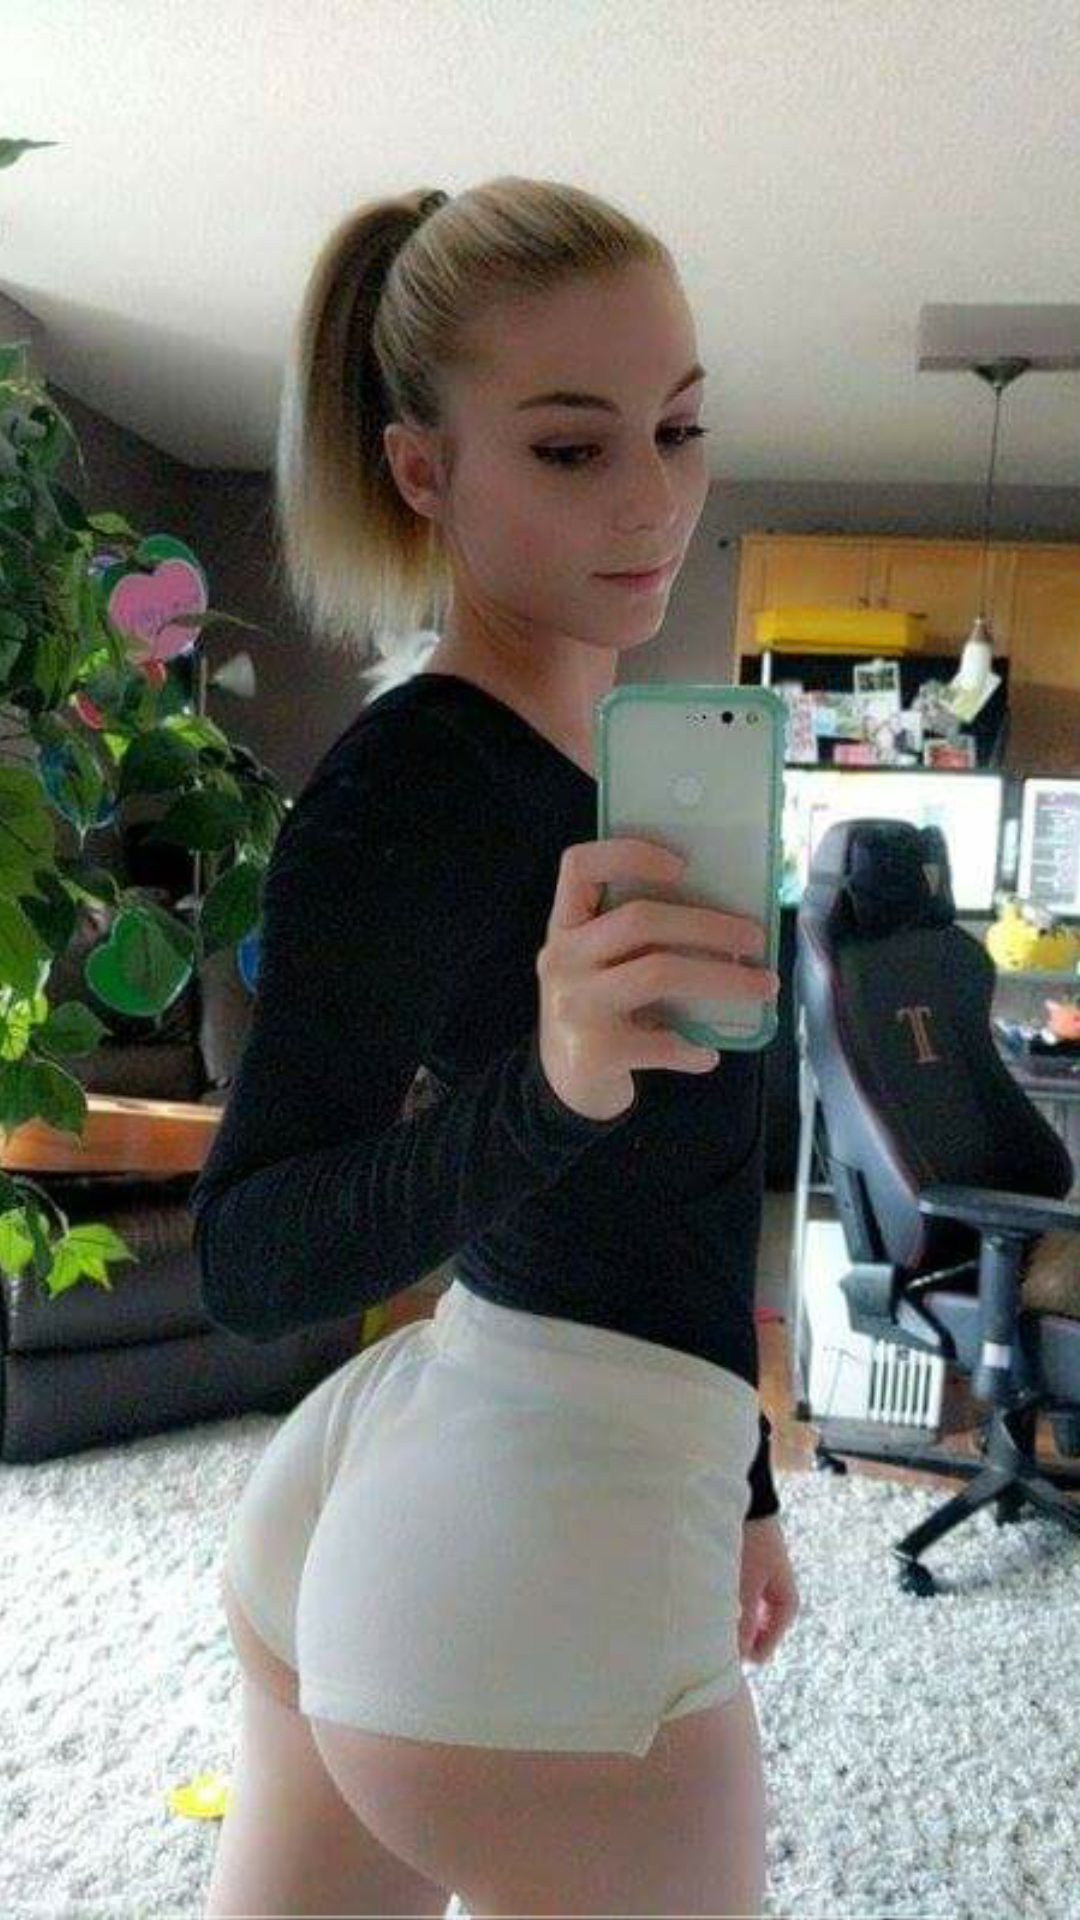 The thread that will turn you on (selfshot teens) XNXX Adult Forum photo